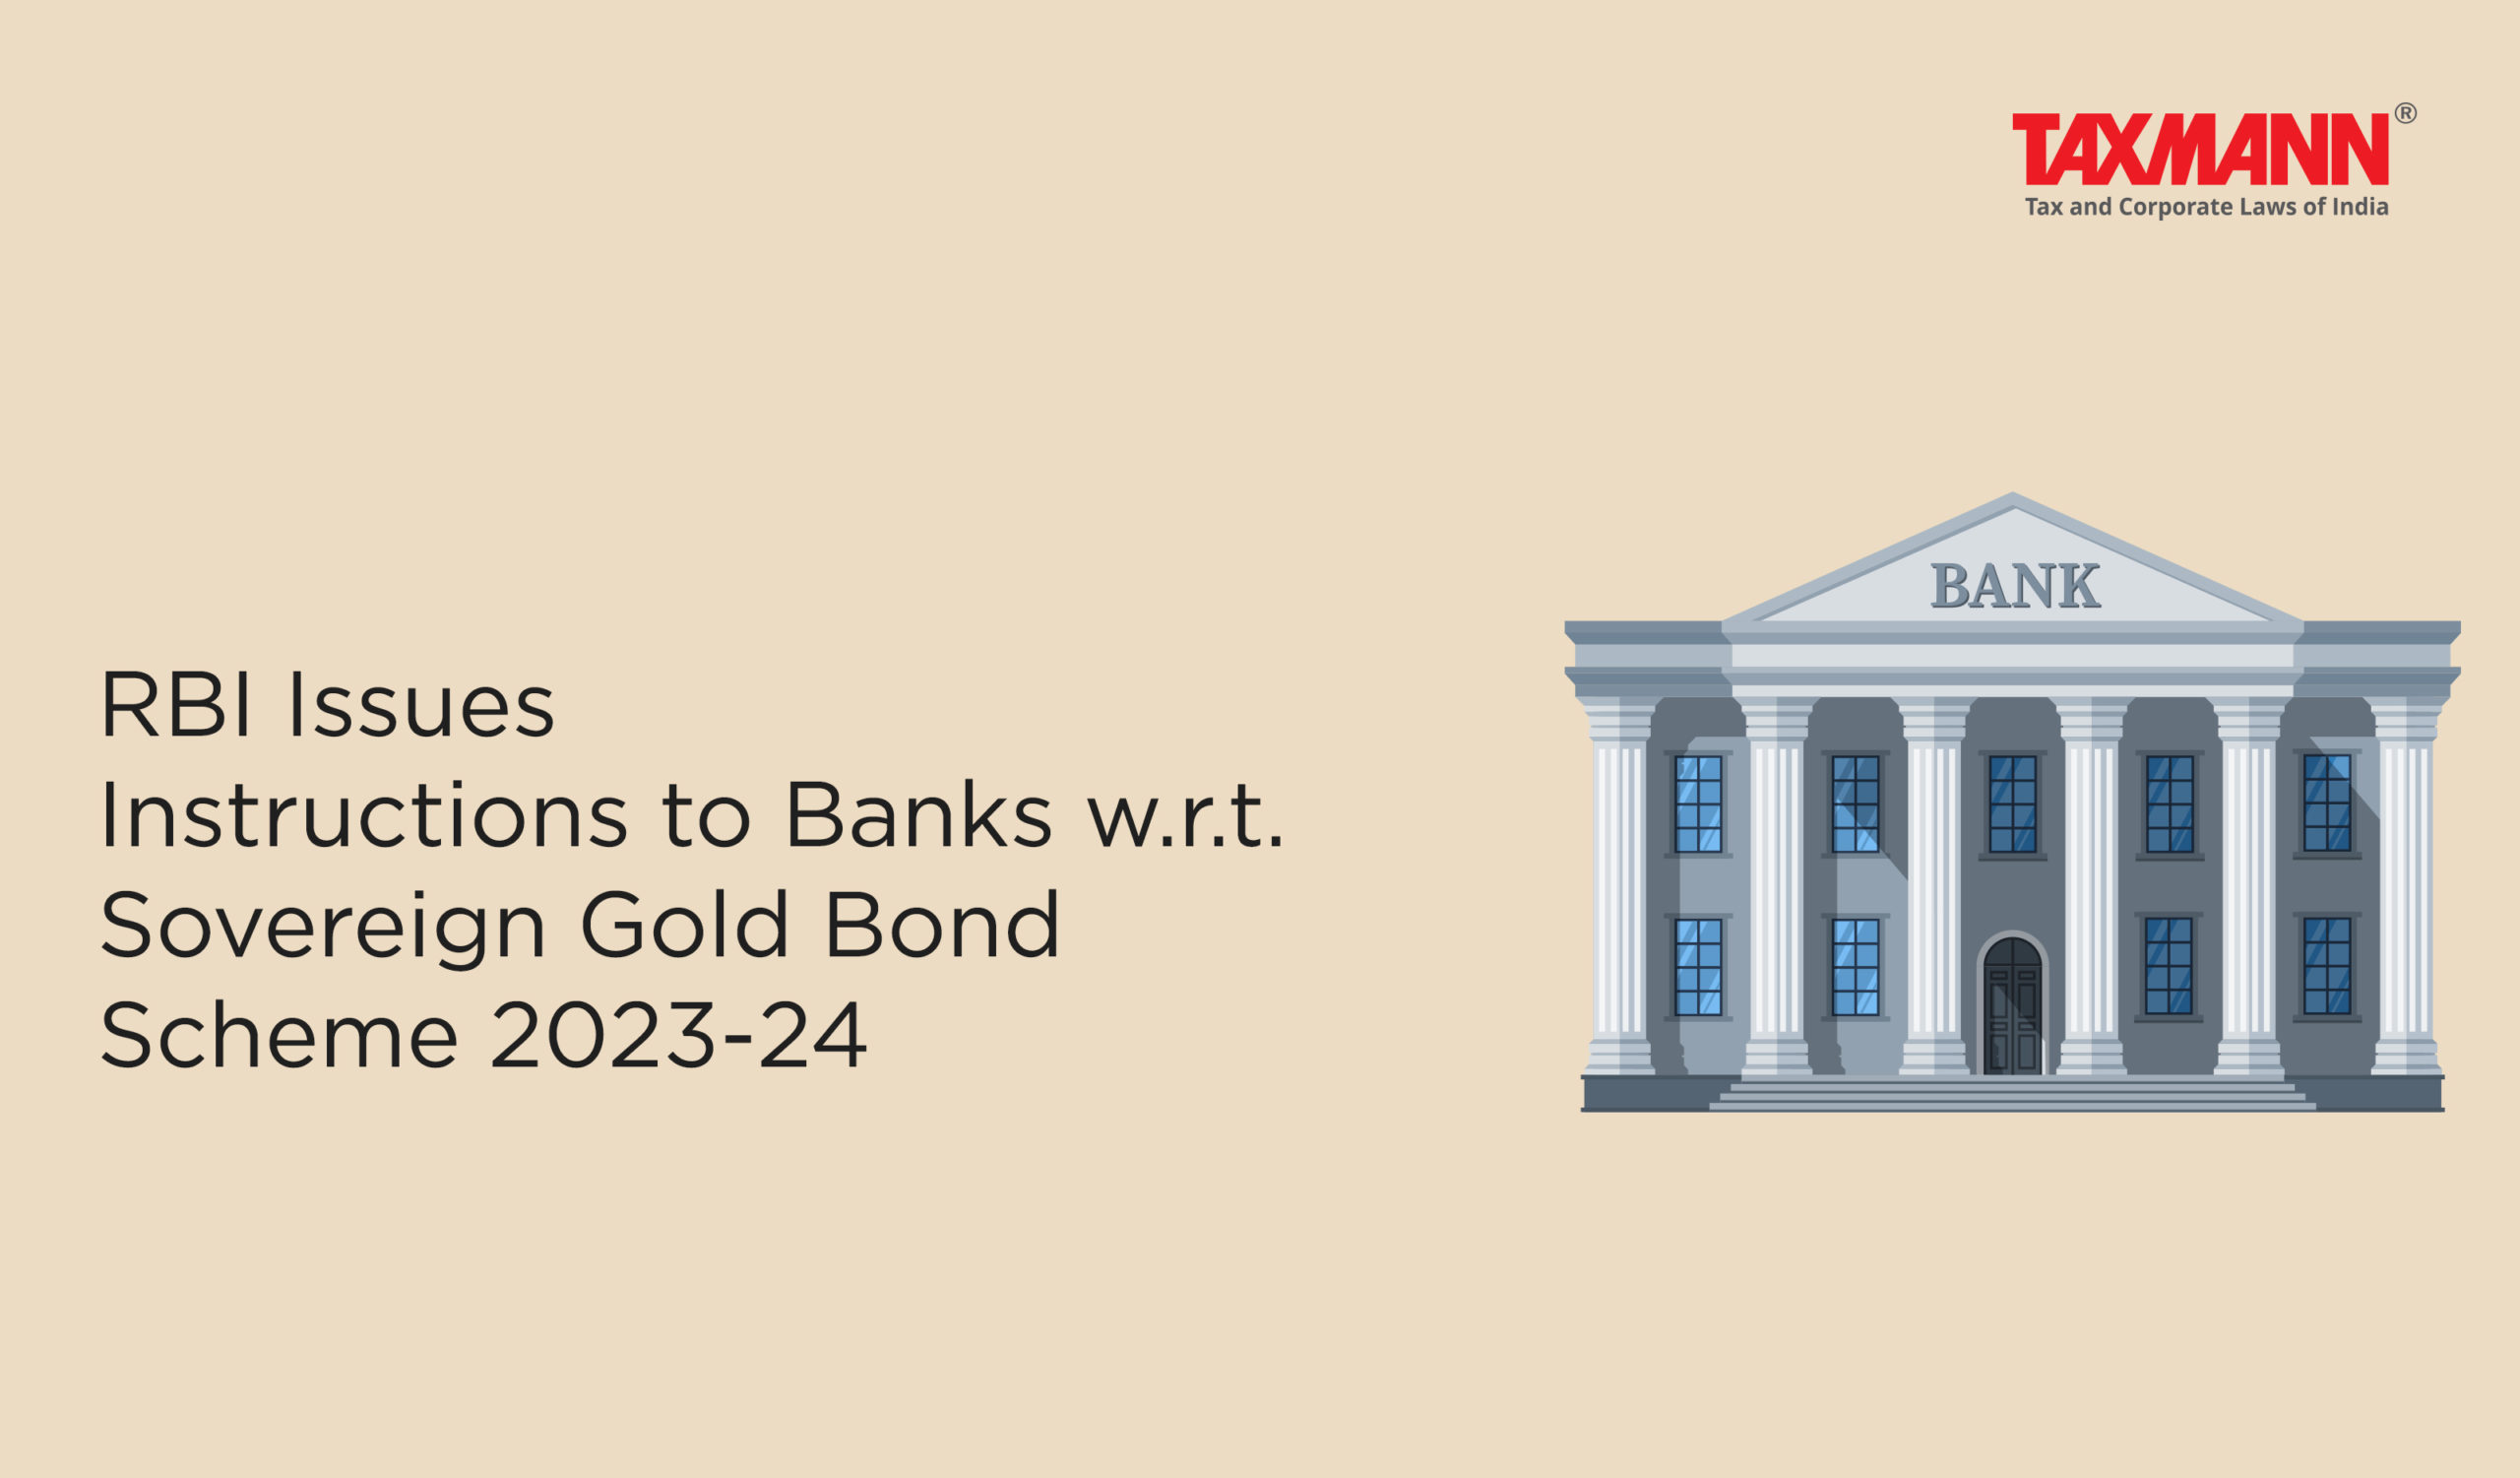 RBI Issues Instructions to Banks w.r.t. Sovereign Gold Bond Scheme 202324